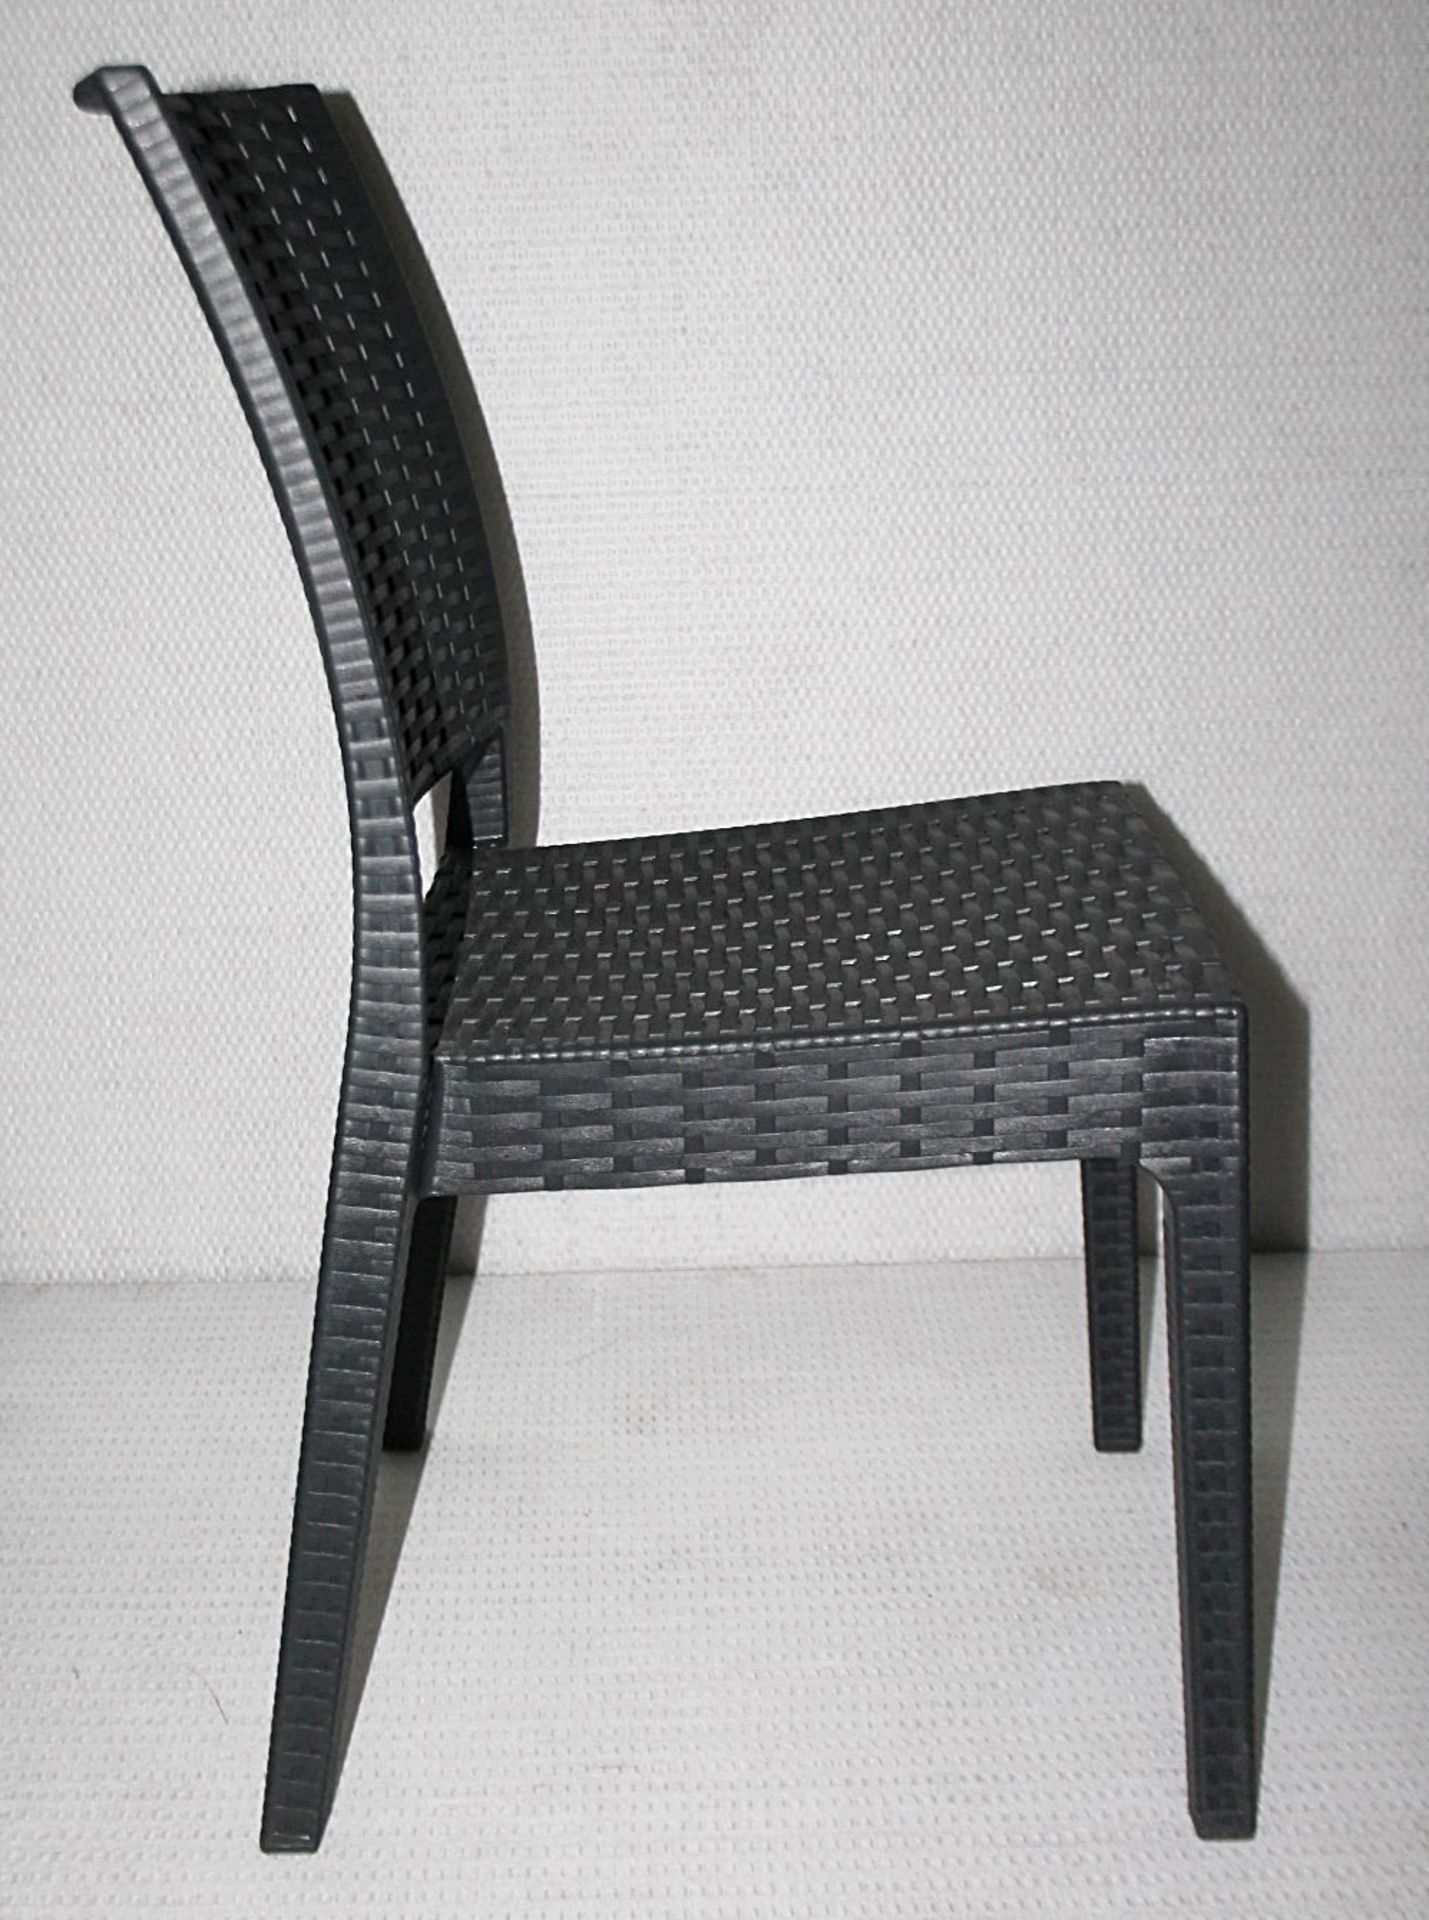 8 x SIESTA EXCLUSIVE 'Florida' Commercial Stackable Rattan-style Chairs In Dark Grey - CL987 - - Image 9 of 13